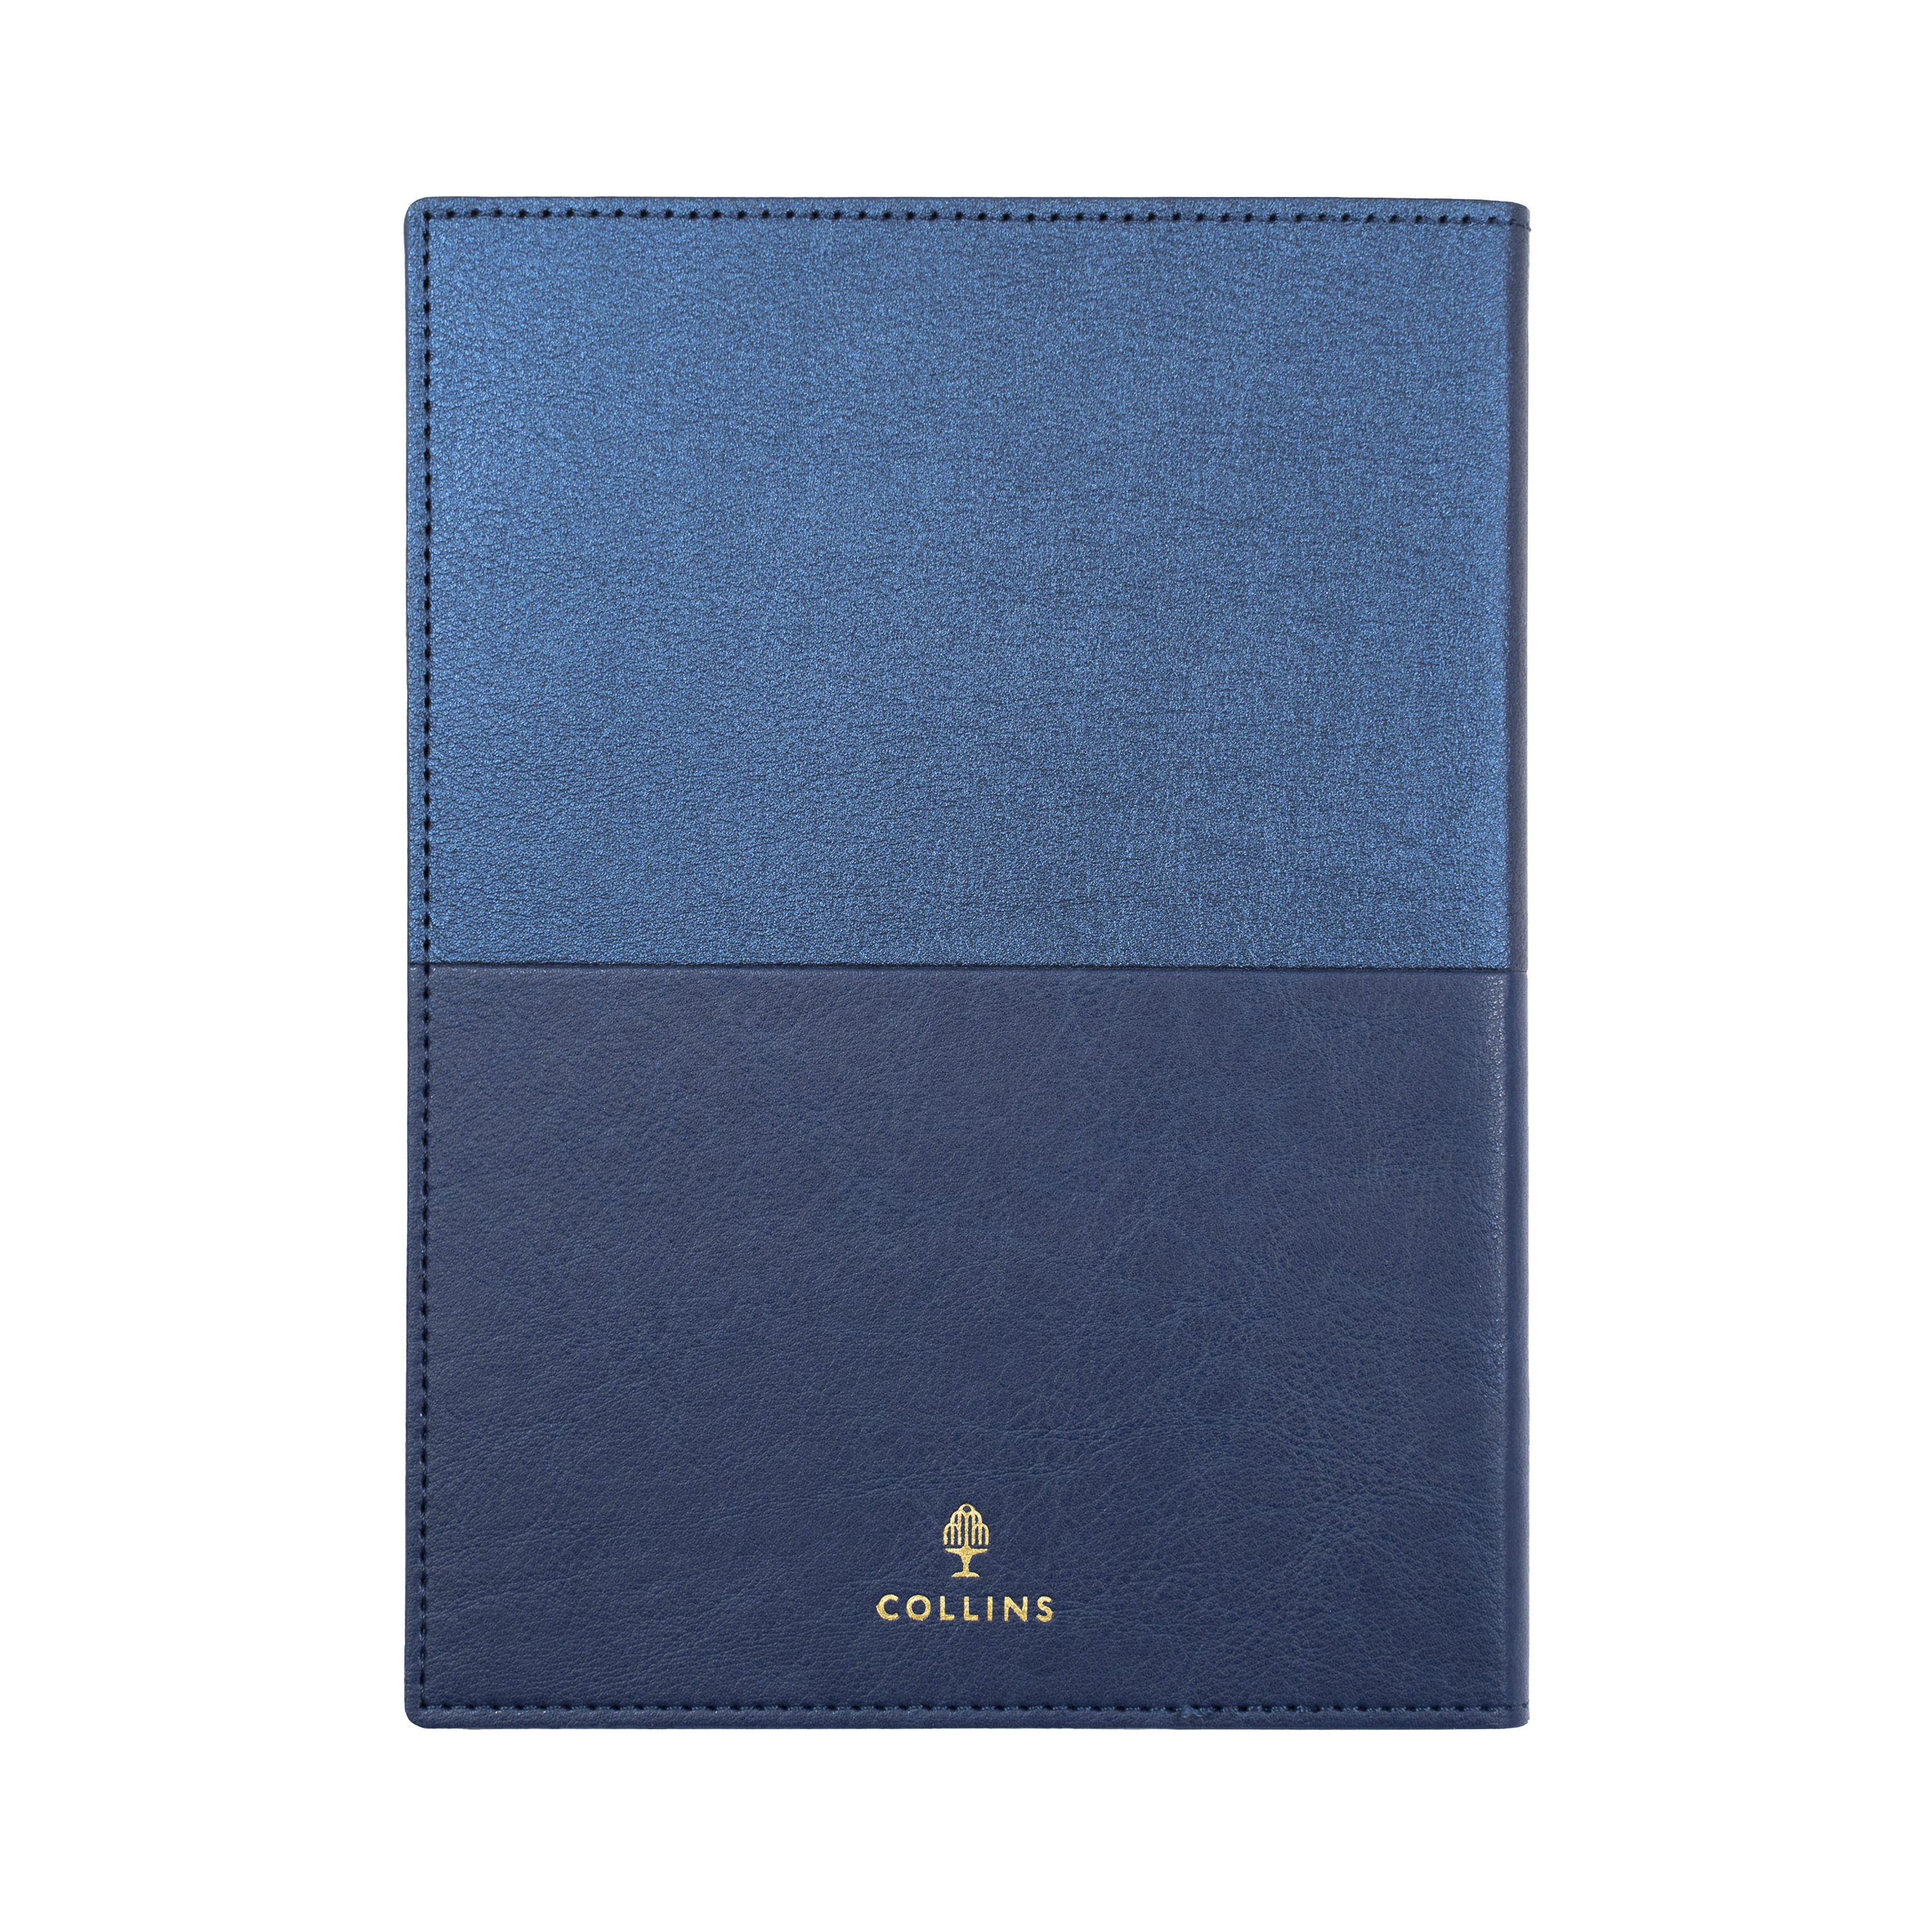 Vanessa 2024 Diary - Week to View, Size A6 Blue / A6 (148 x 105mm)